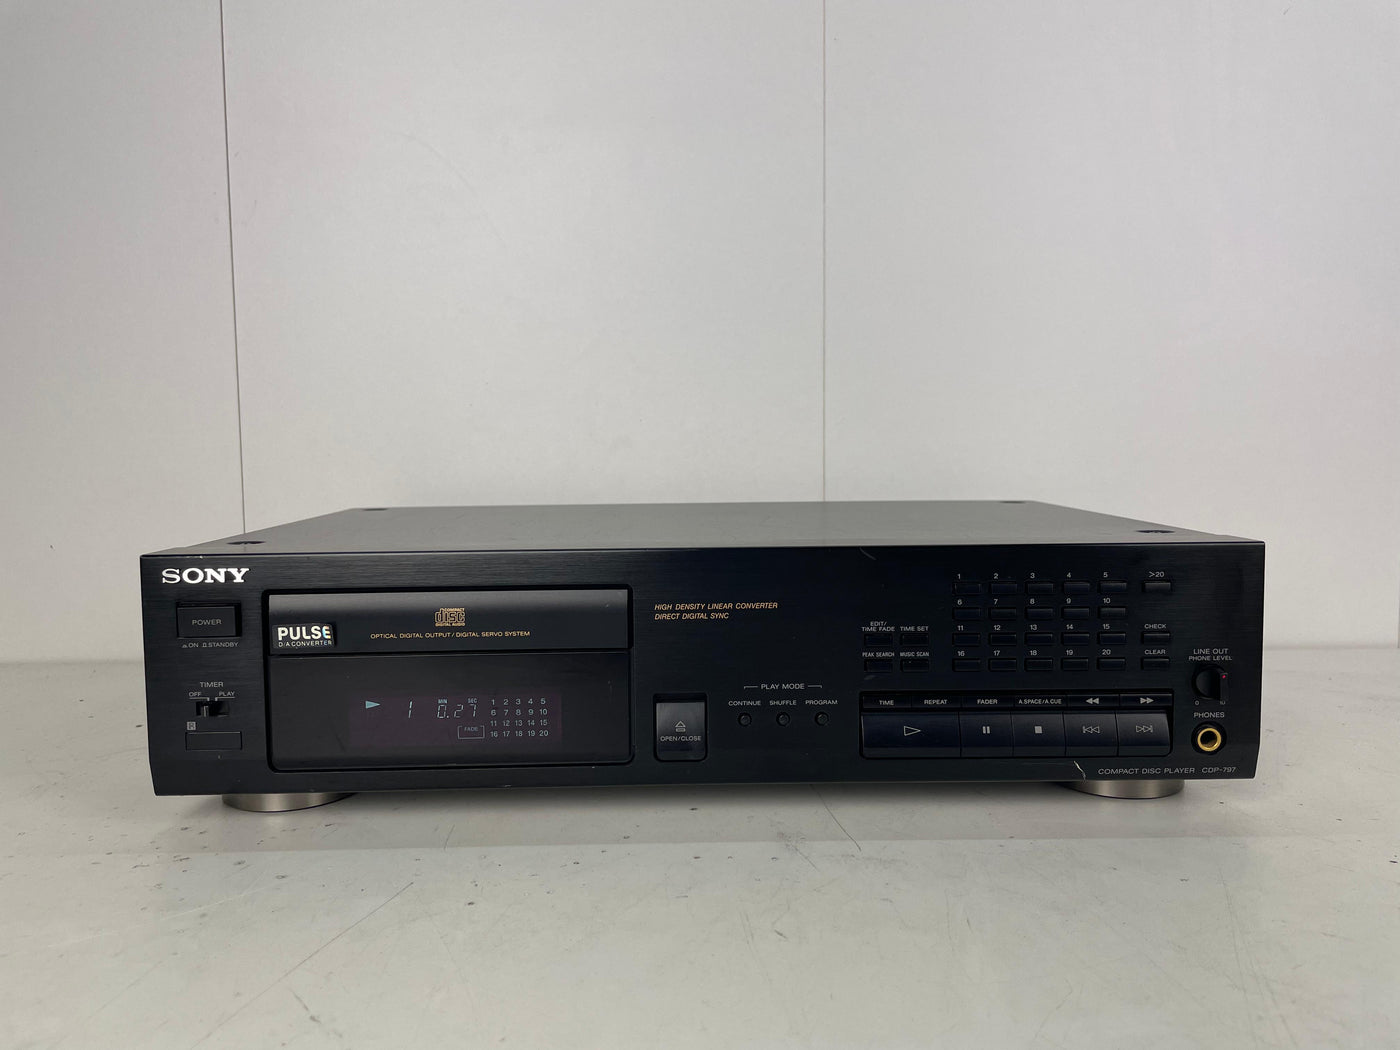 Sony CDP-797 Stereo Compact Disc Player